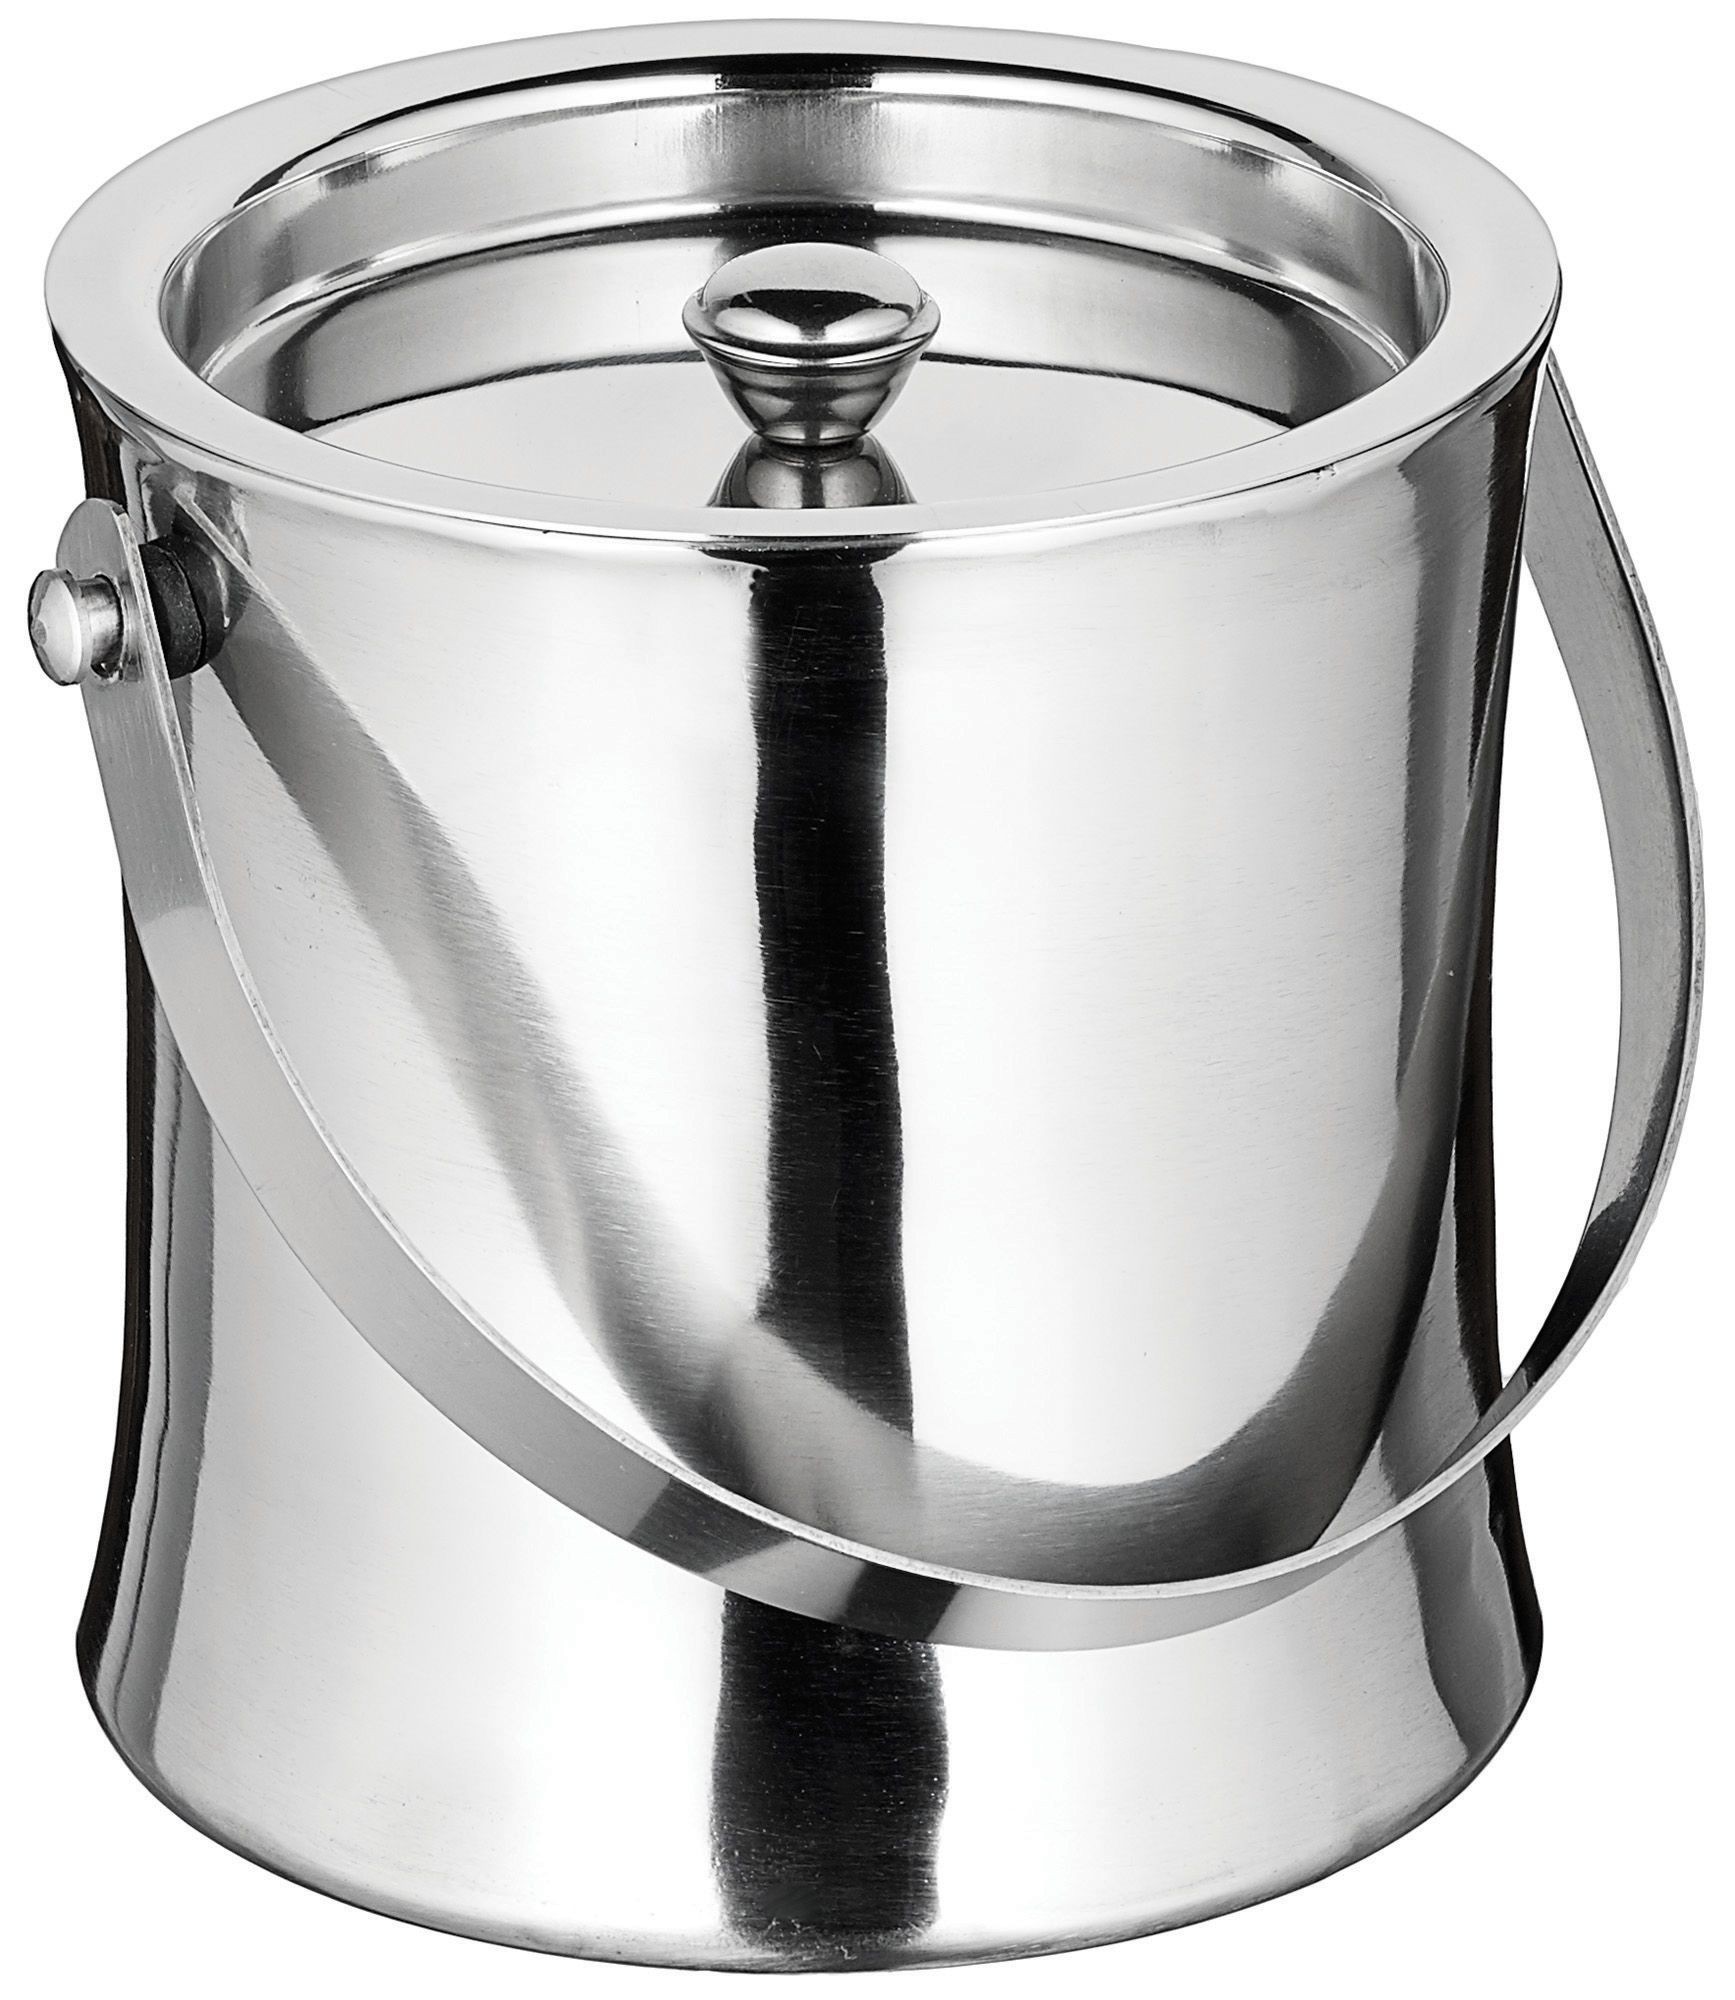 Winco ICB-60 Stainless Steel 60 oz. Double-Wall Ice Bucket